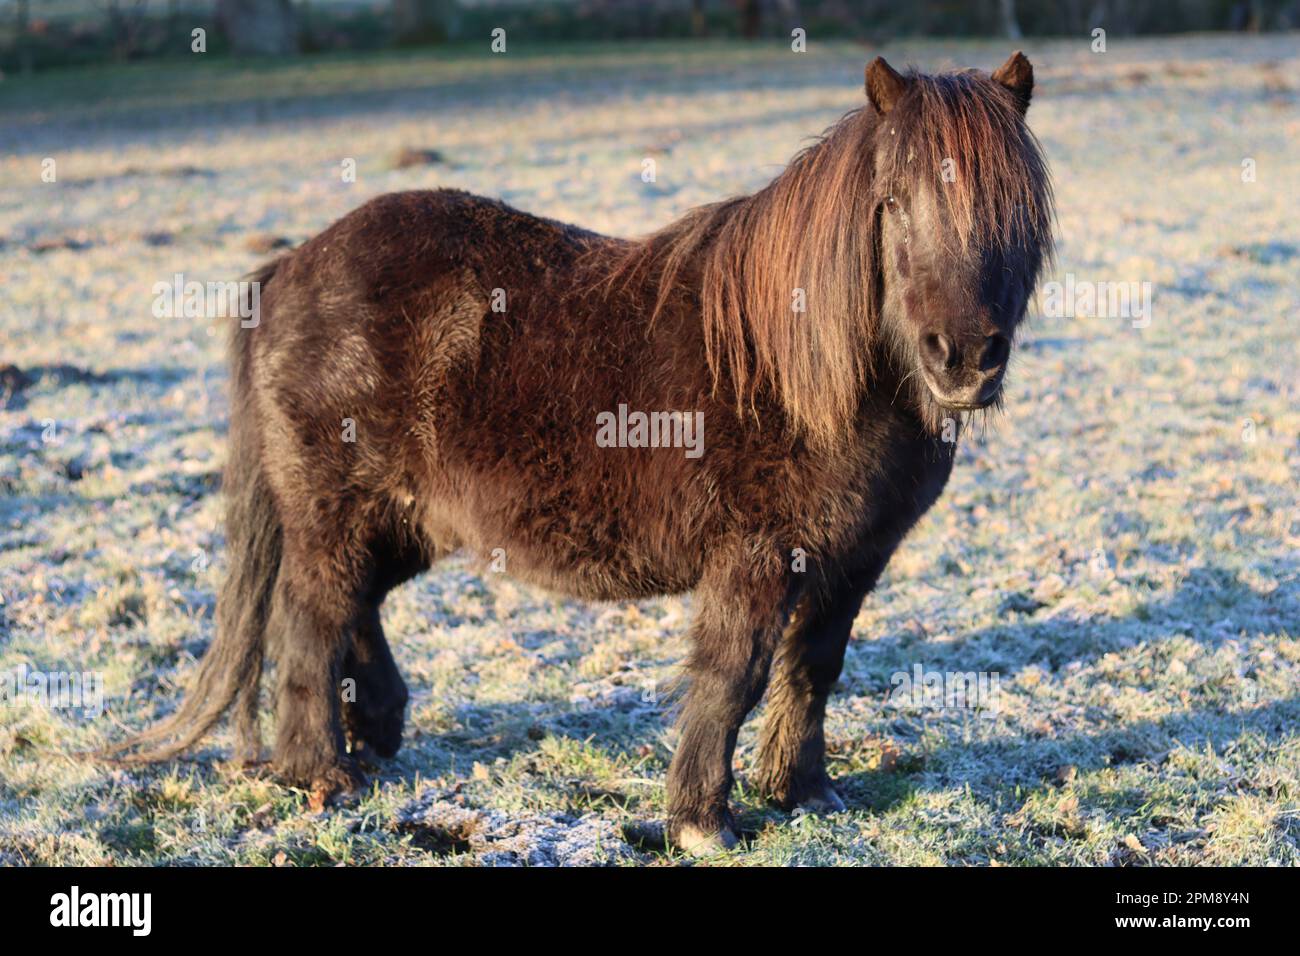 Close up of a Shetland pony standing in a frozen field in winter sunshine Stock Photo